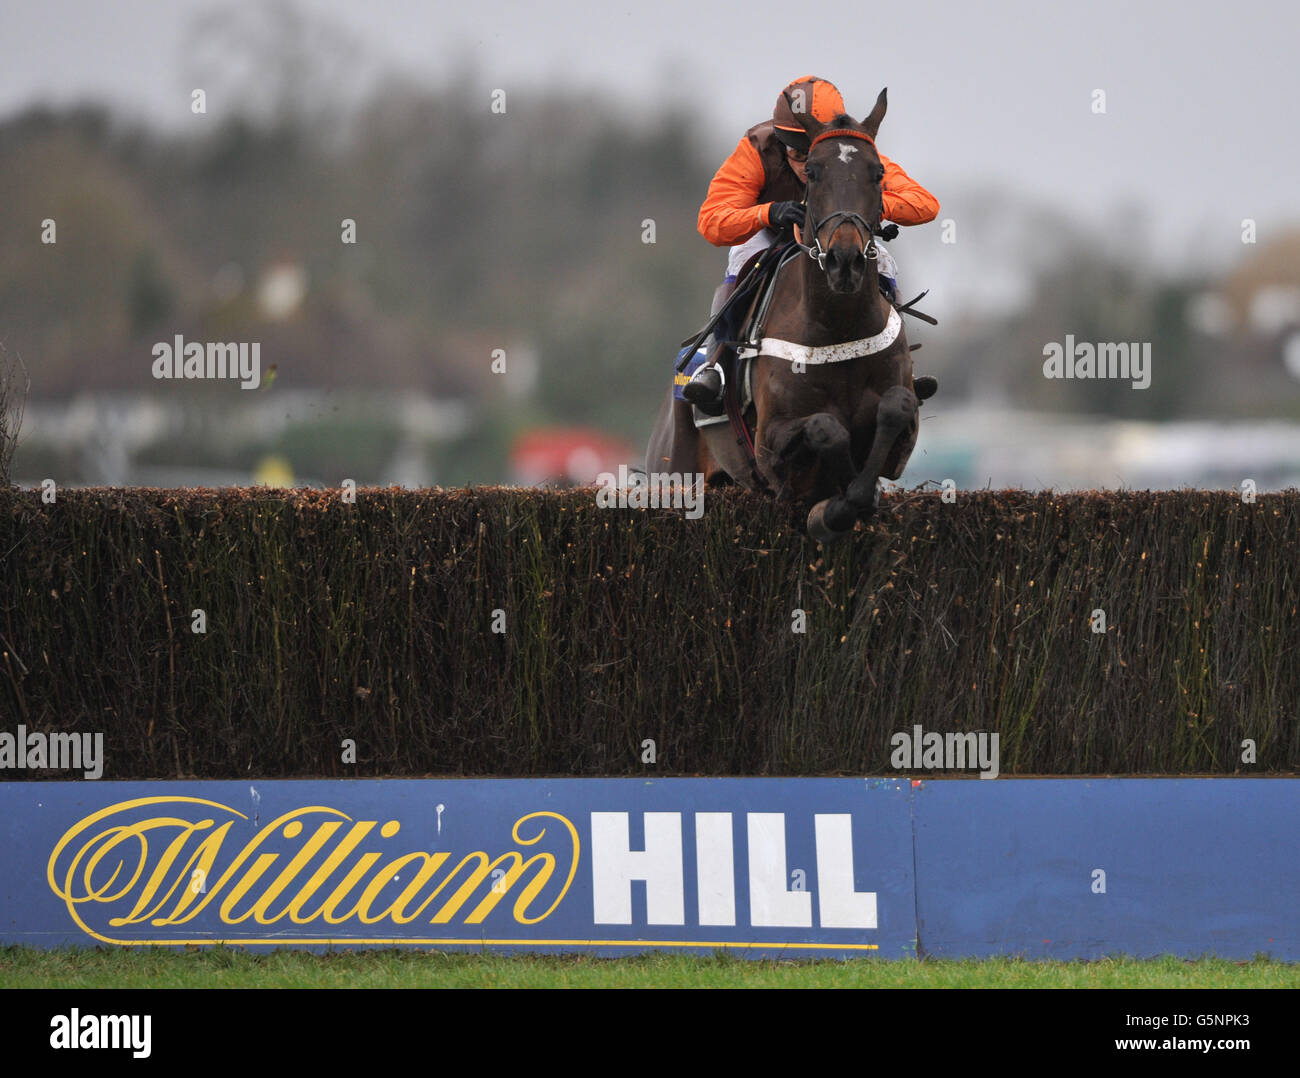 Sam Waley-Cohen on board Rajdhani Express clears the last on the way to winning the second race, the William Hill - Download The App Novices' Handicap Chase Stock Photo